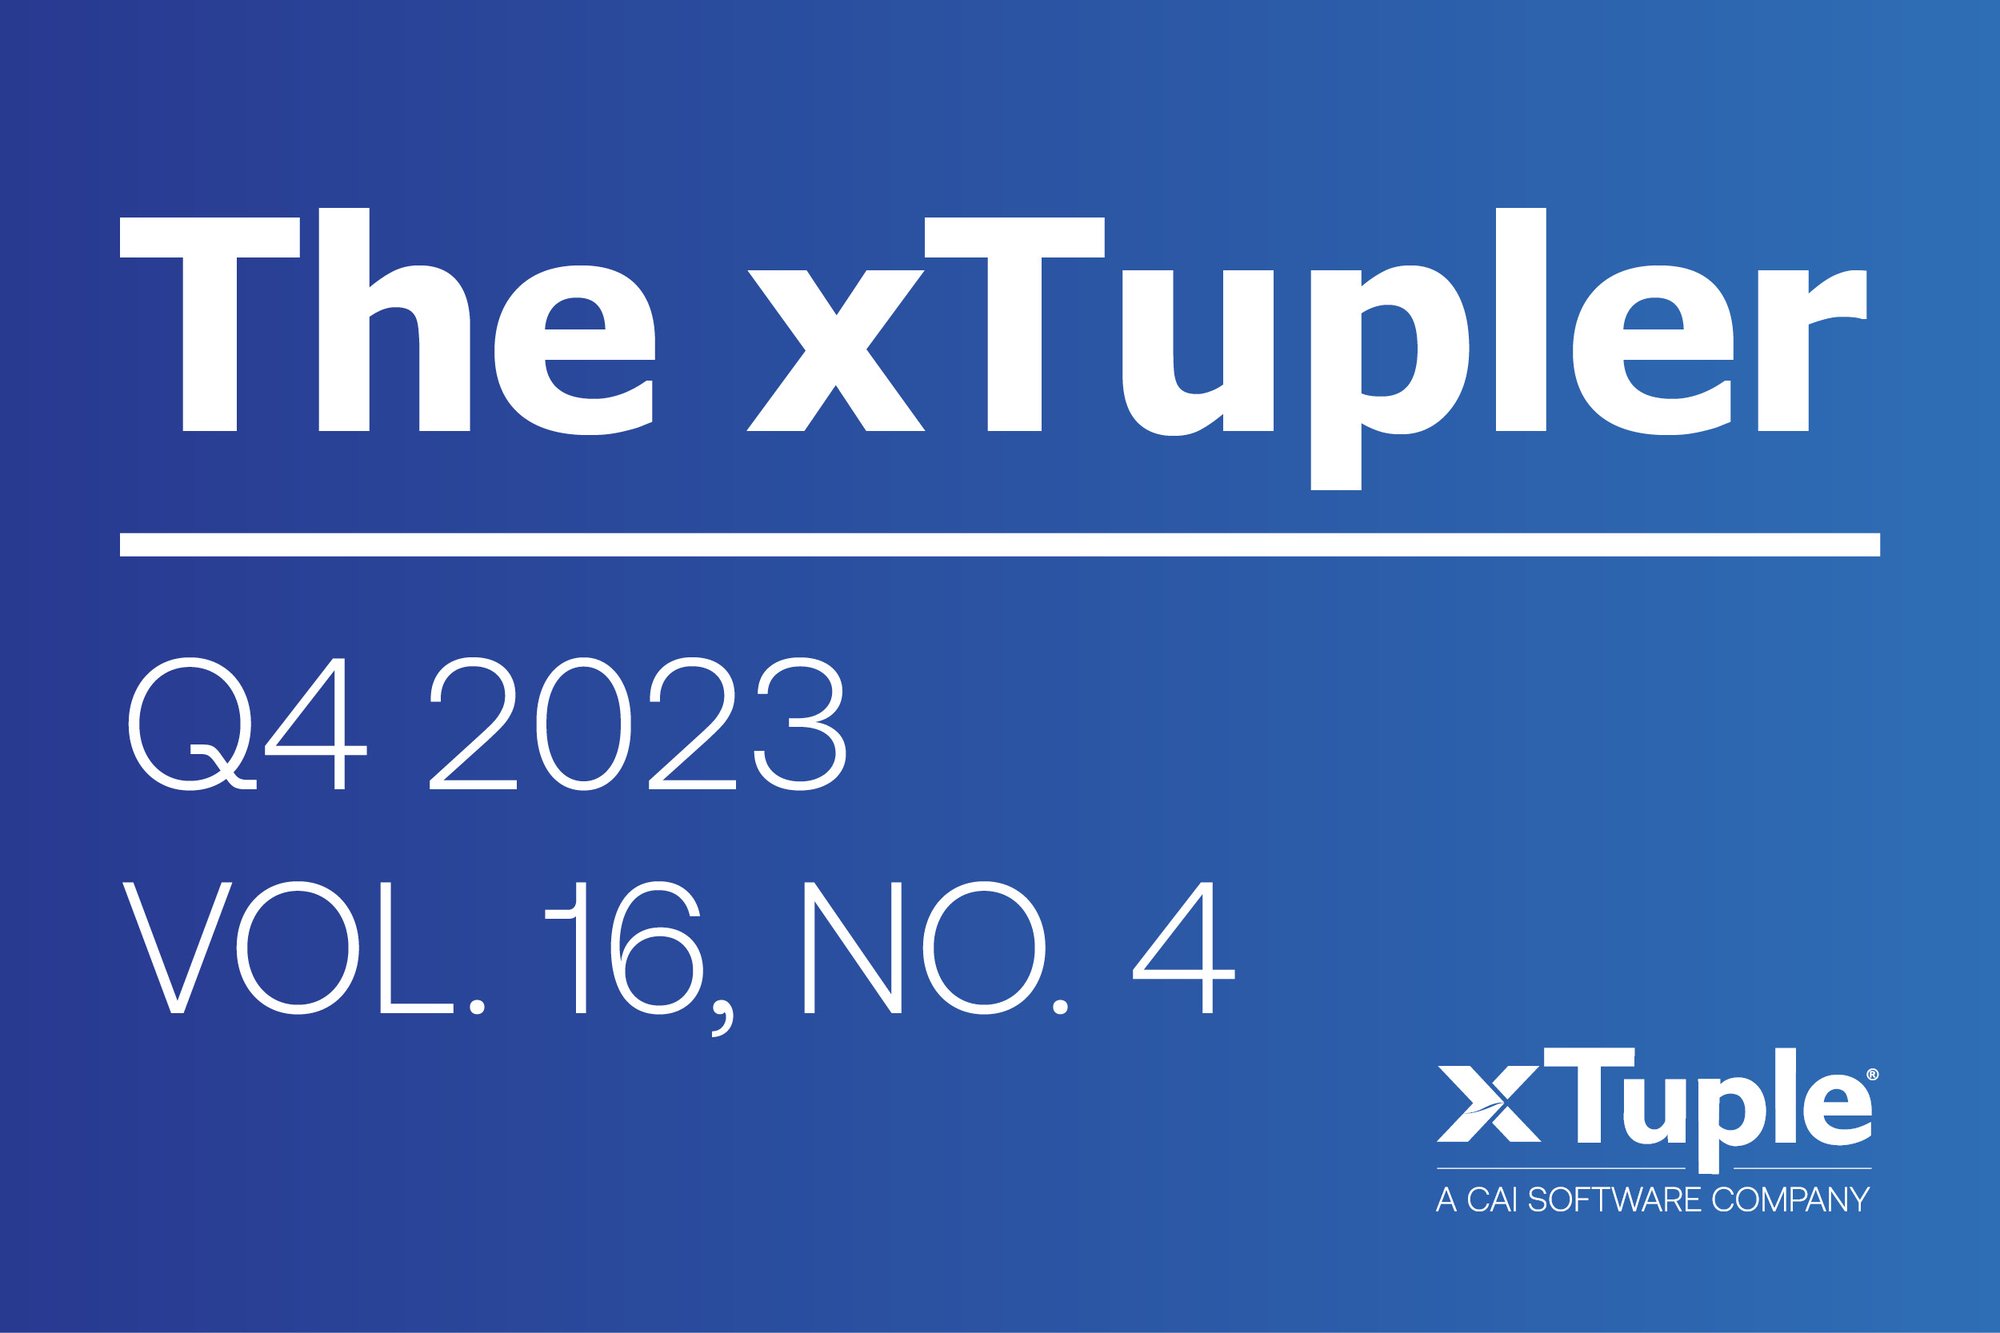 xTupler Newsletter icon graphic for resources page - Q4 2023